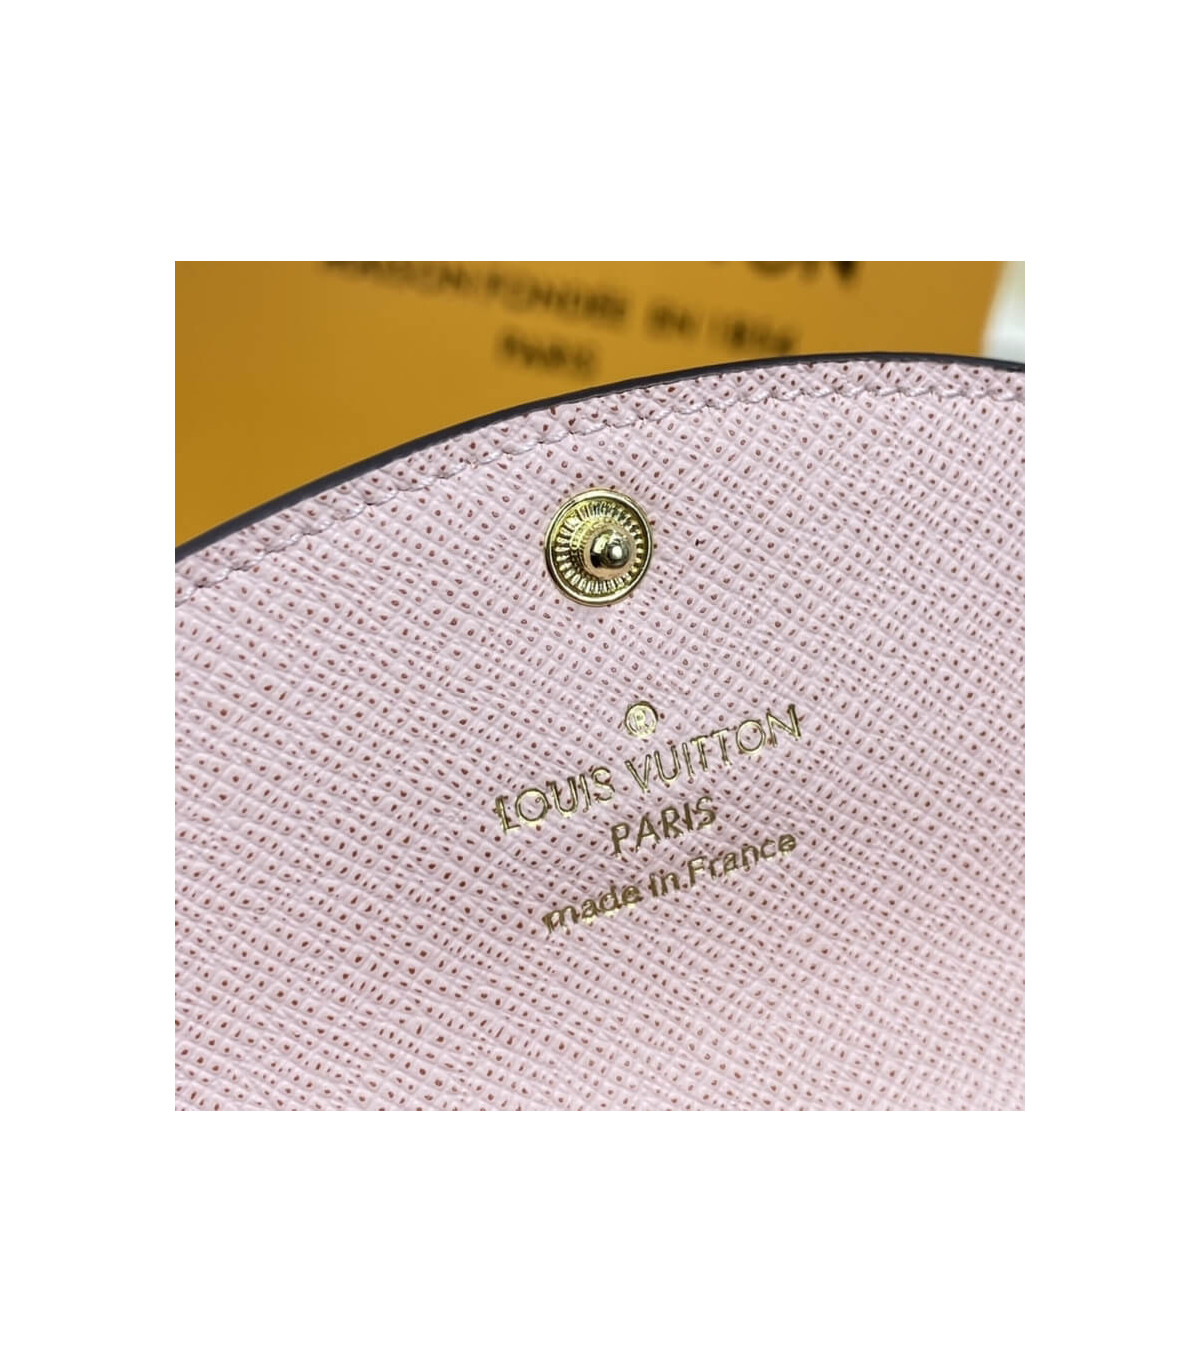 Unboxing the Louis Vuitton rosalie coin purse 💖 The pink inside